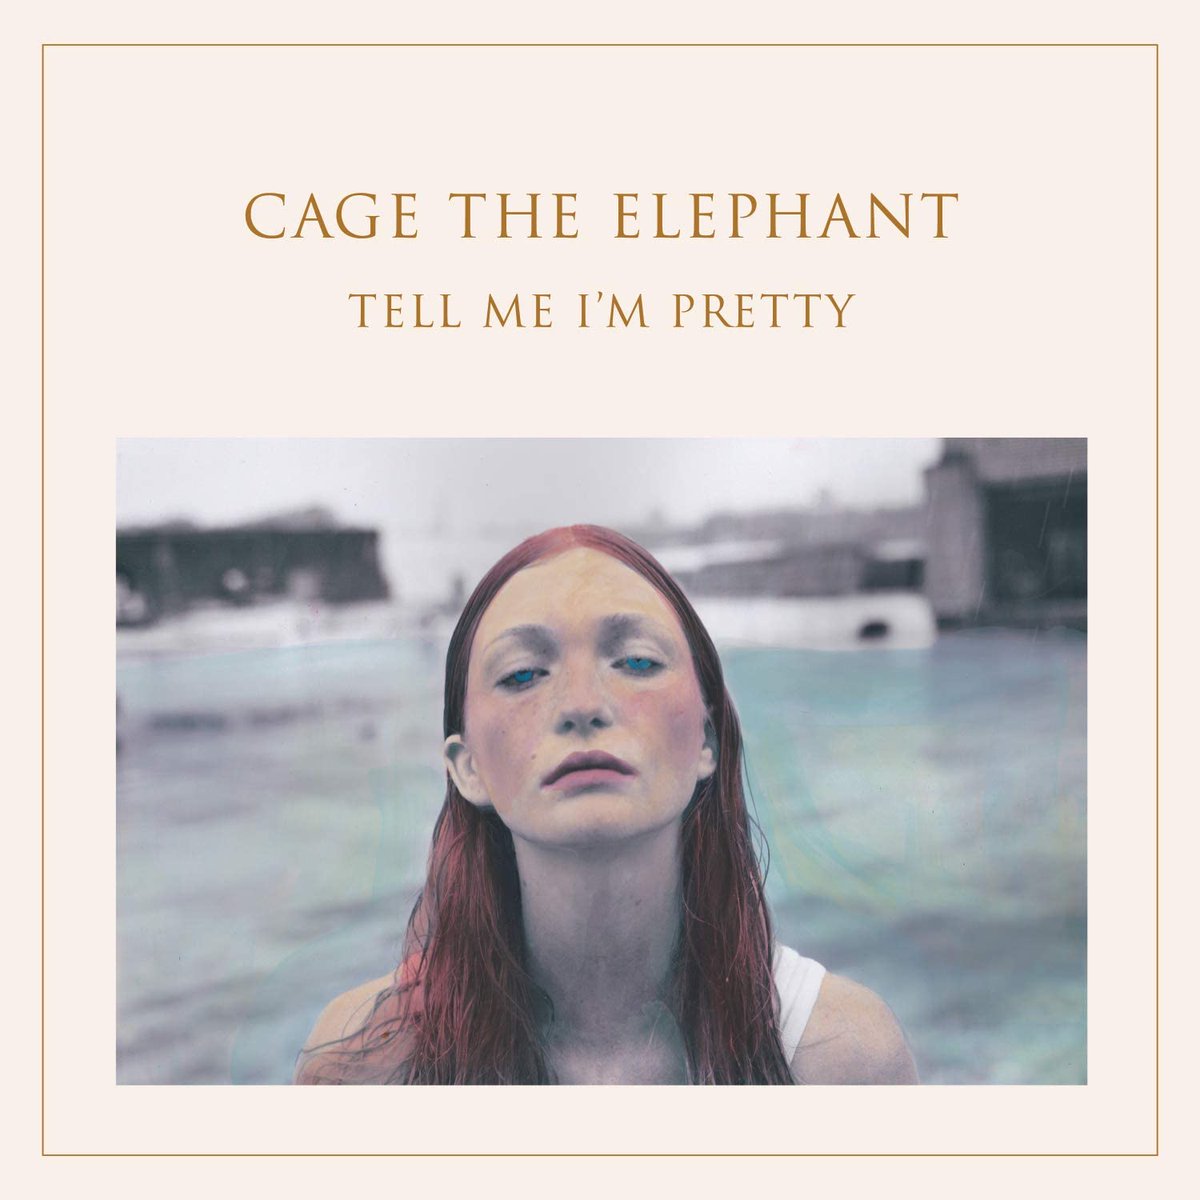 Cage The Elephant - Tell Me I'm Pretty2015 - 38min  Trouble  Sweetie Little Jean  Mess Around